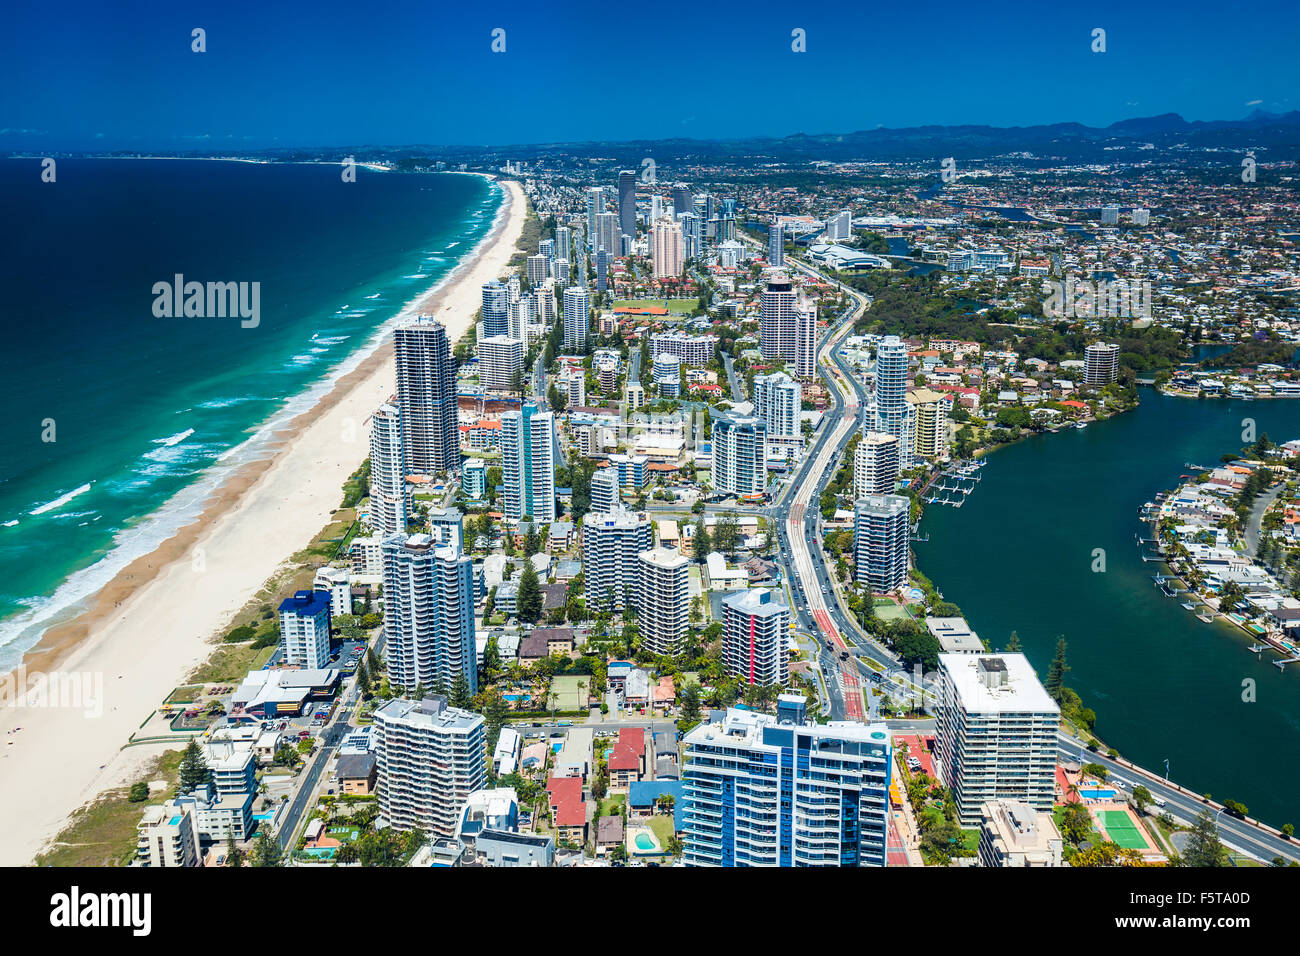 GOLD COAST, AUS - OCT 04 2015: Aerial view of the Gold Coast in Queensland Australia looking from Surfers Paradise down to Coola Stock Photo